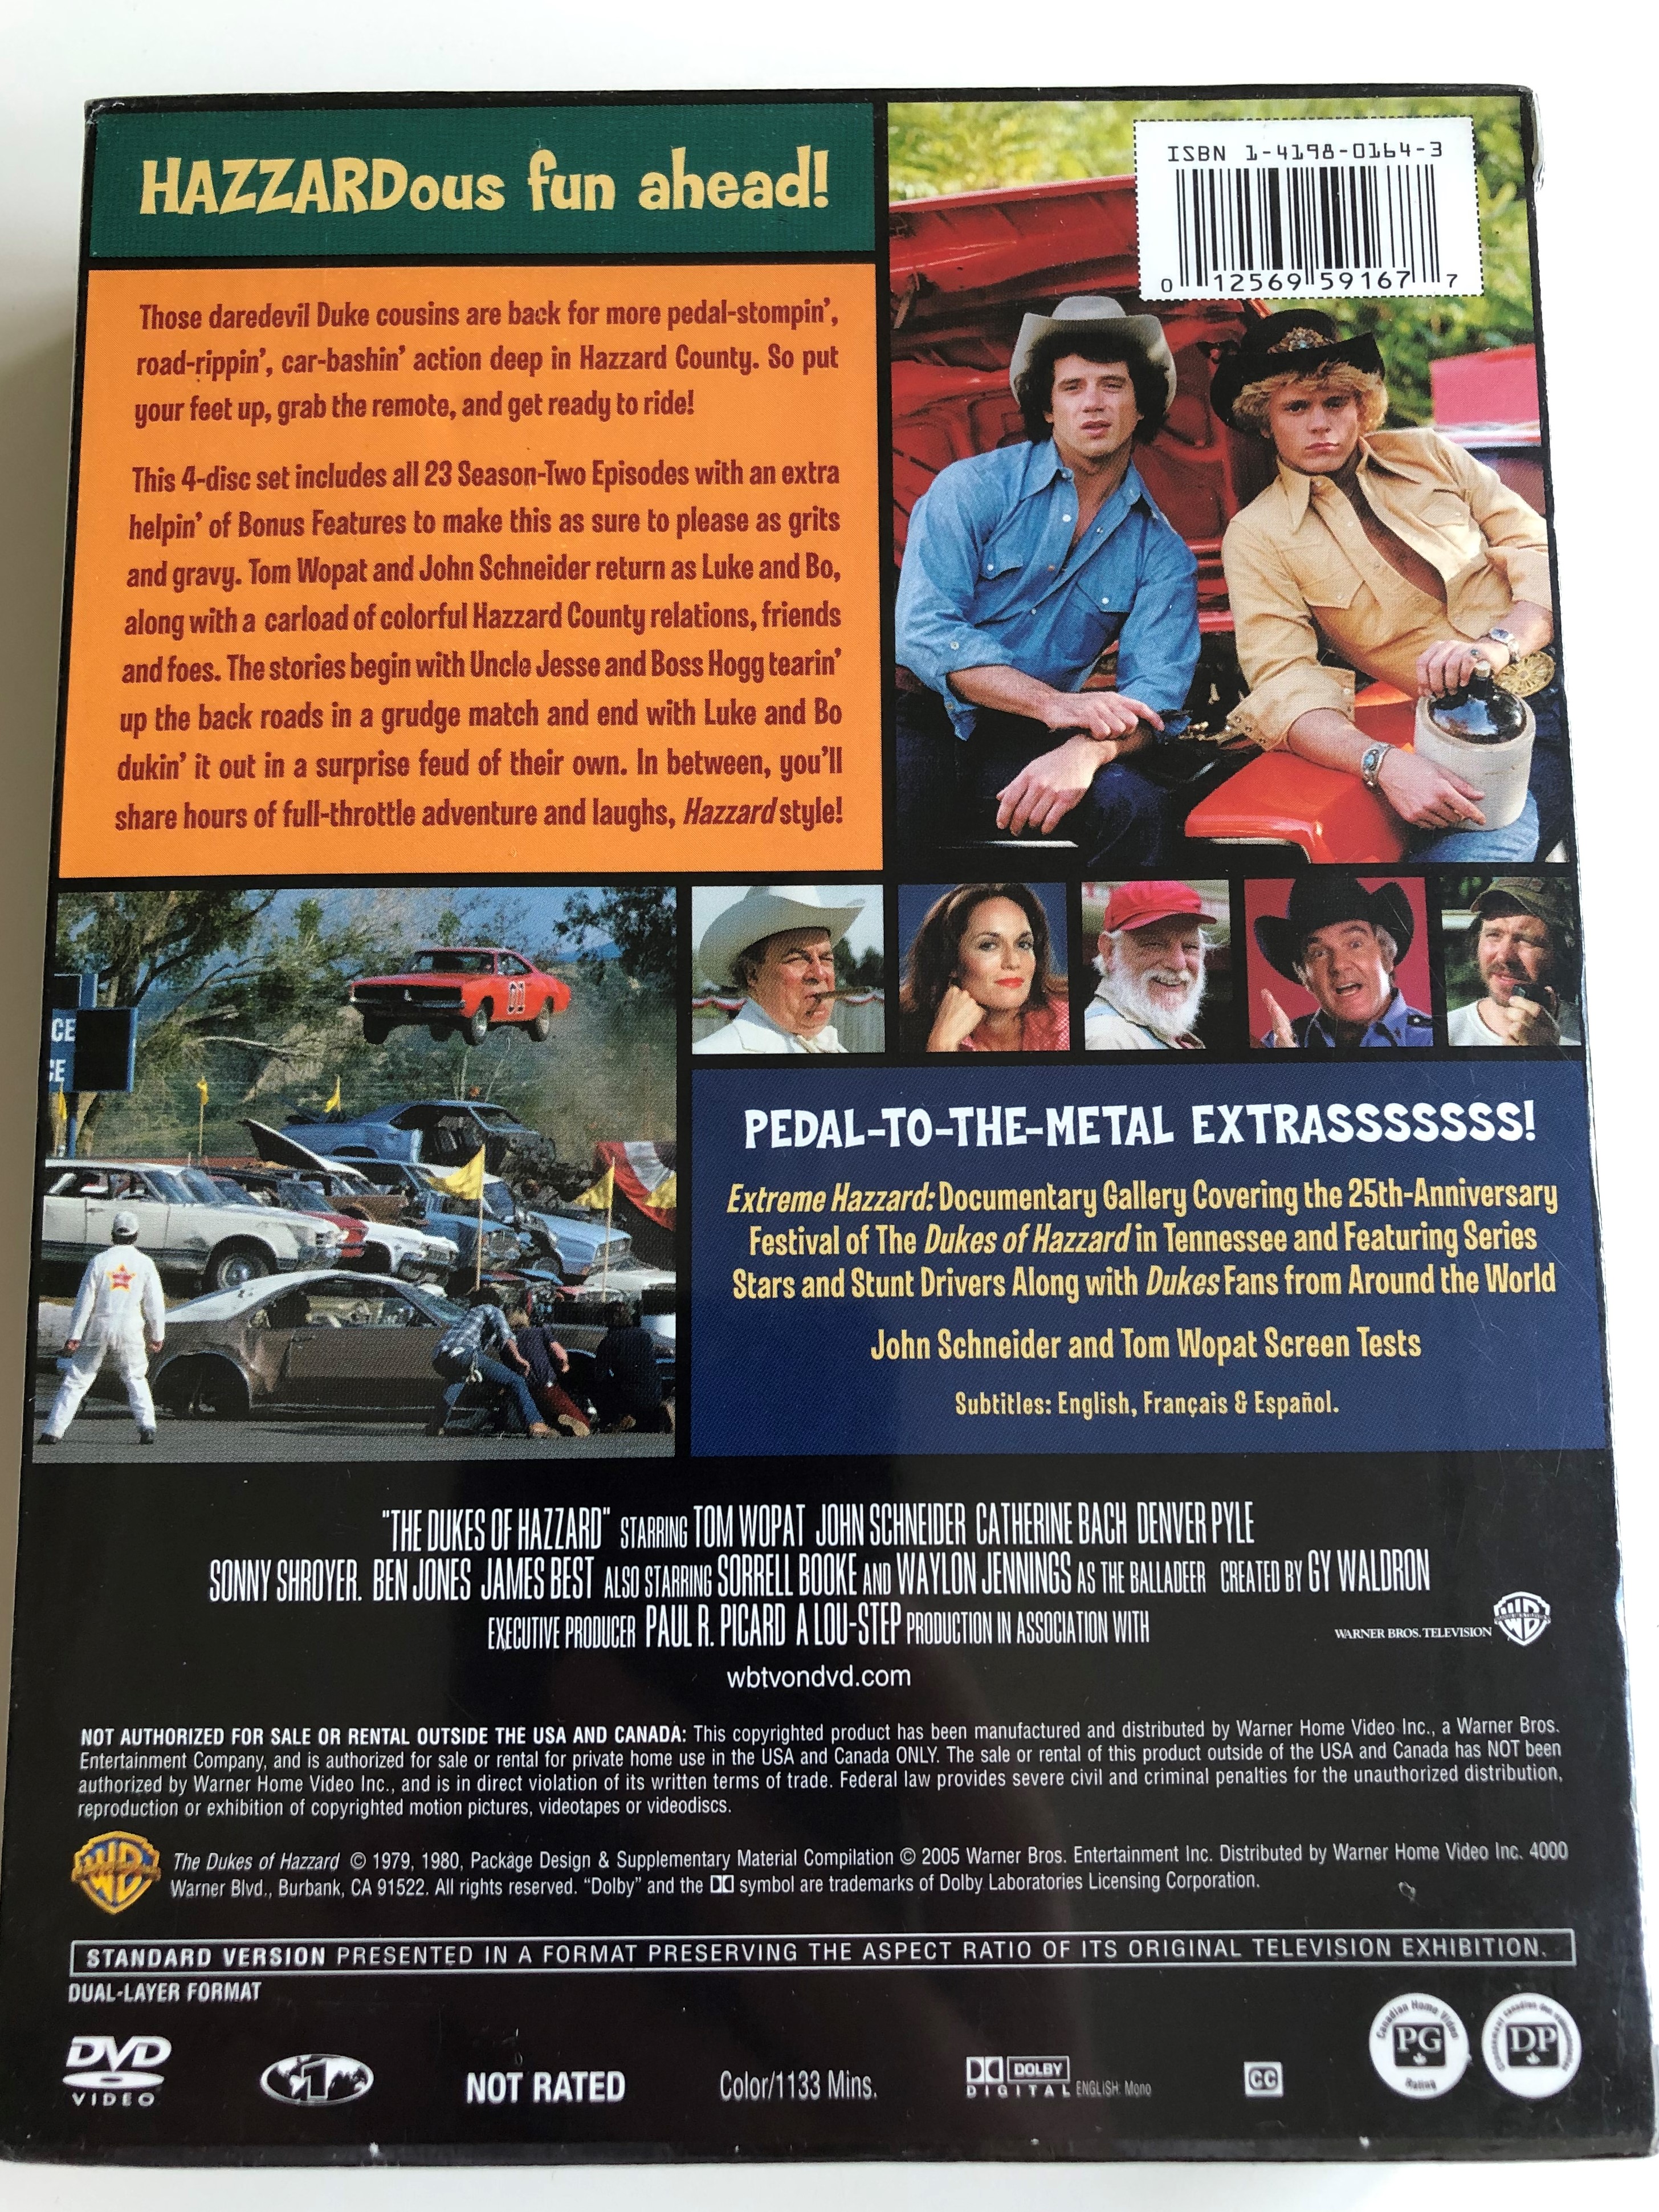 the-dukes-of-hazzard-dvd-box-set-1979-created-by-gy-waldron-jerry-rushing-starring-tom-wopat-john-schneider-catherine-bach-denver-pyle-the-complete-season-2.-4-discs-23-episodes-3-.jpg